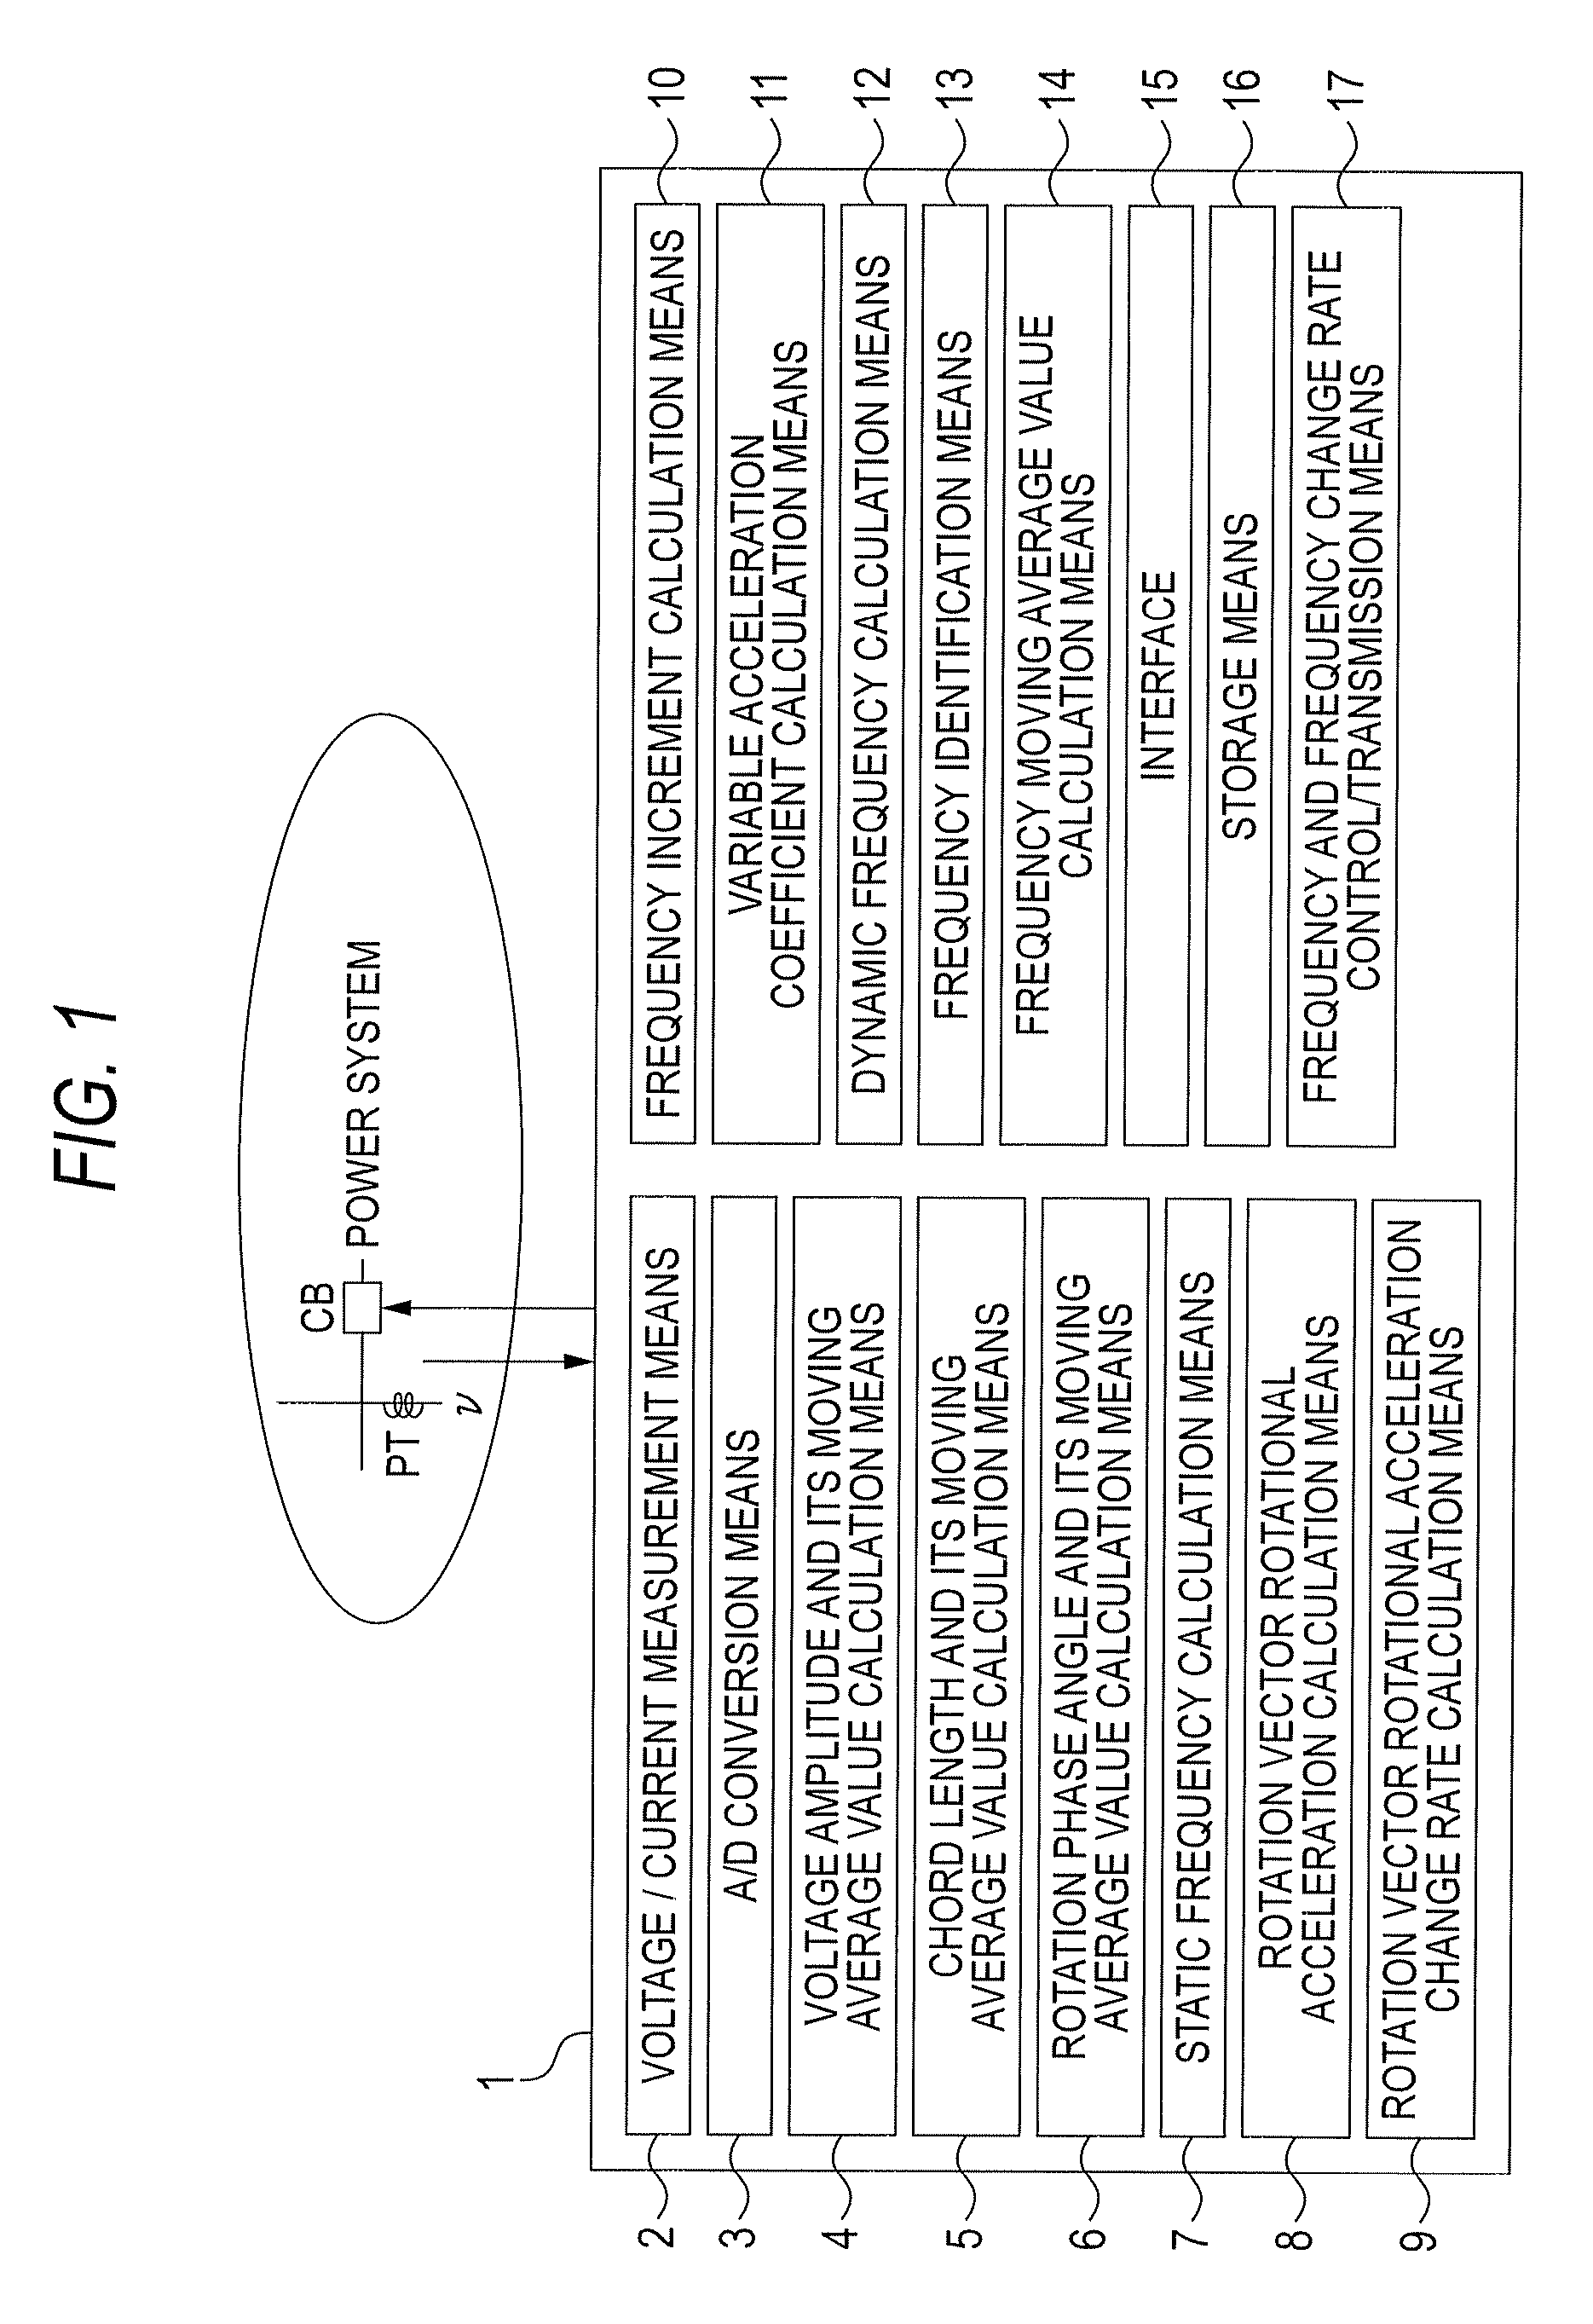 Frequency measurement apparatus